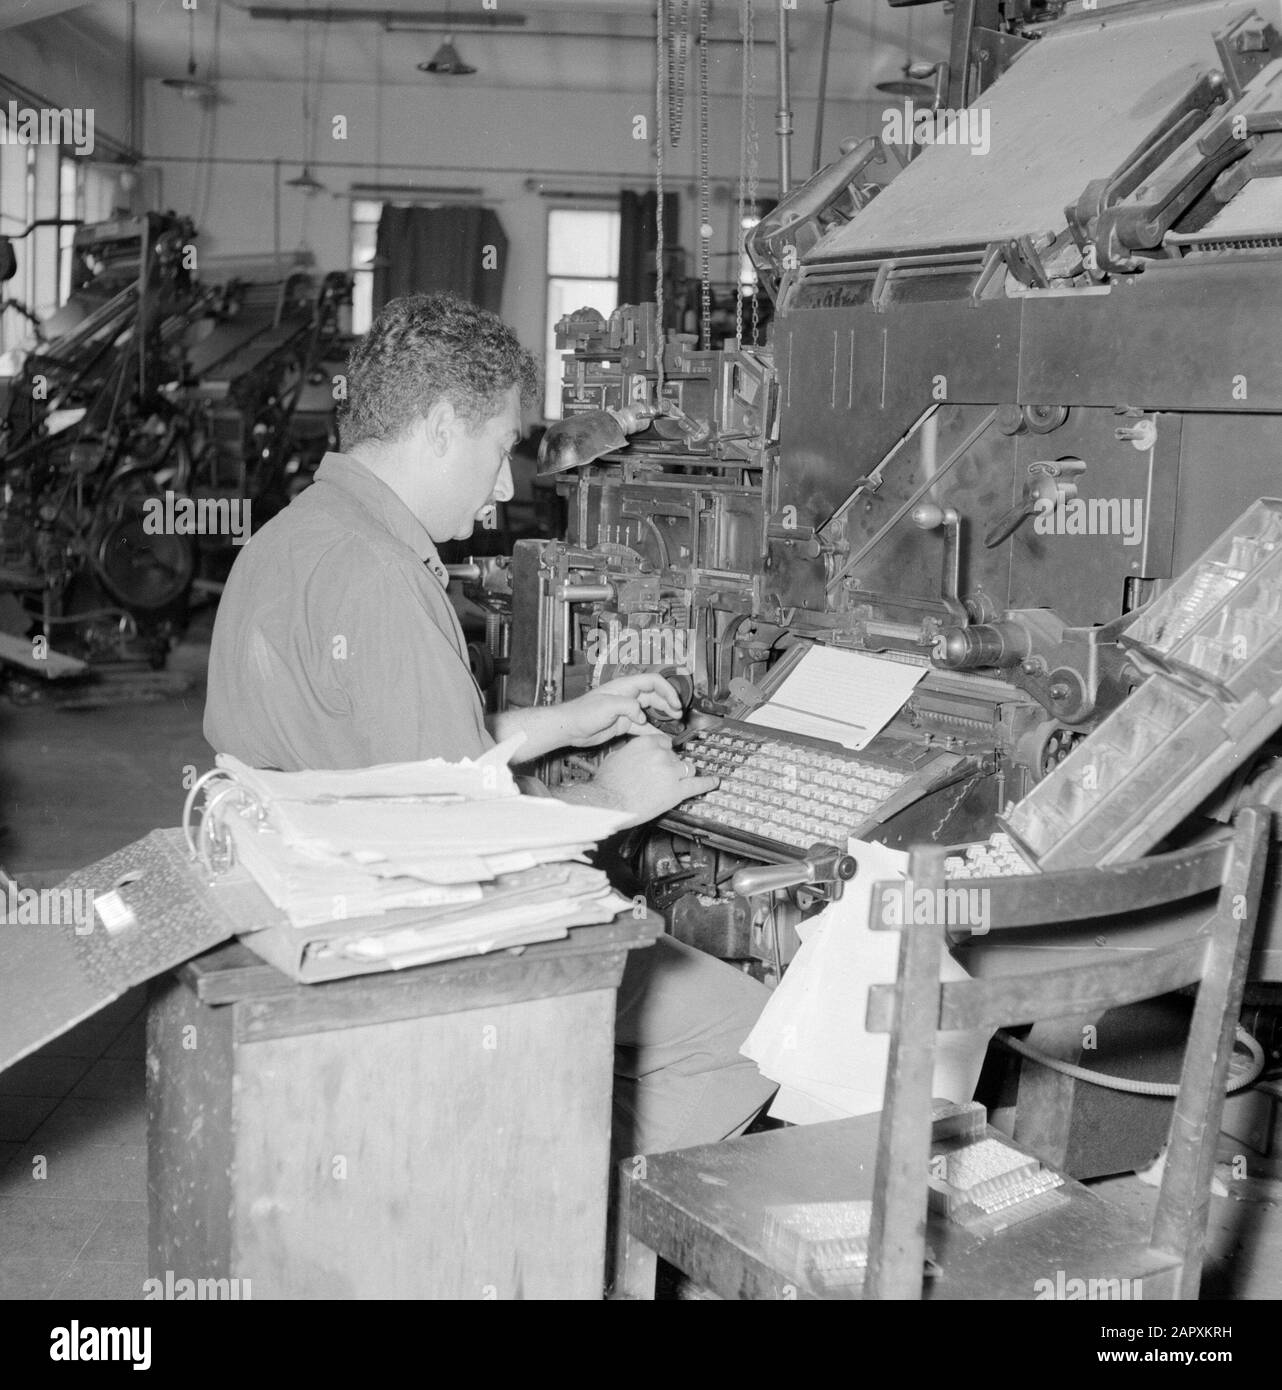 Israel 1964-1965: Tel Aviv, Dawar Printing,  Tel Aviv. Typographer working behind a linotype breeder in the printing house where the daily Dawar (Dvar) is printed Annotation: The Linotype is a regulating machine in which the functions of putting and casting are united. The machine was developed by a German immigrant in the US and produced from 1886 Date: 1964 Location: Israel, Tel Aviv Keywords: workers, printing, newspapers, machines, typographers, workshops Stock Photo